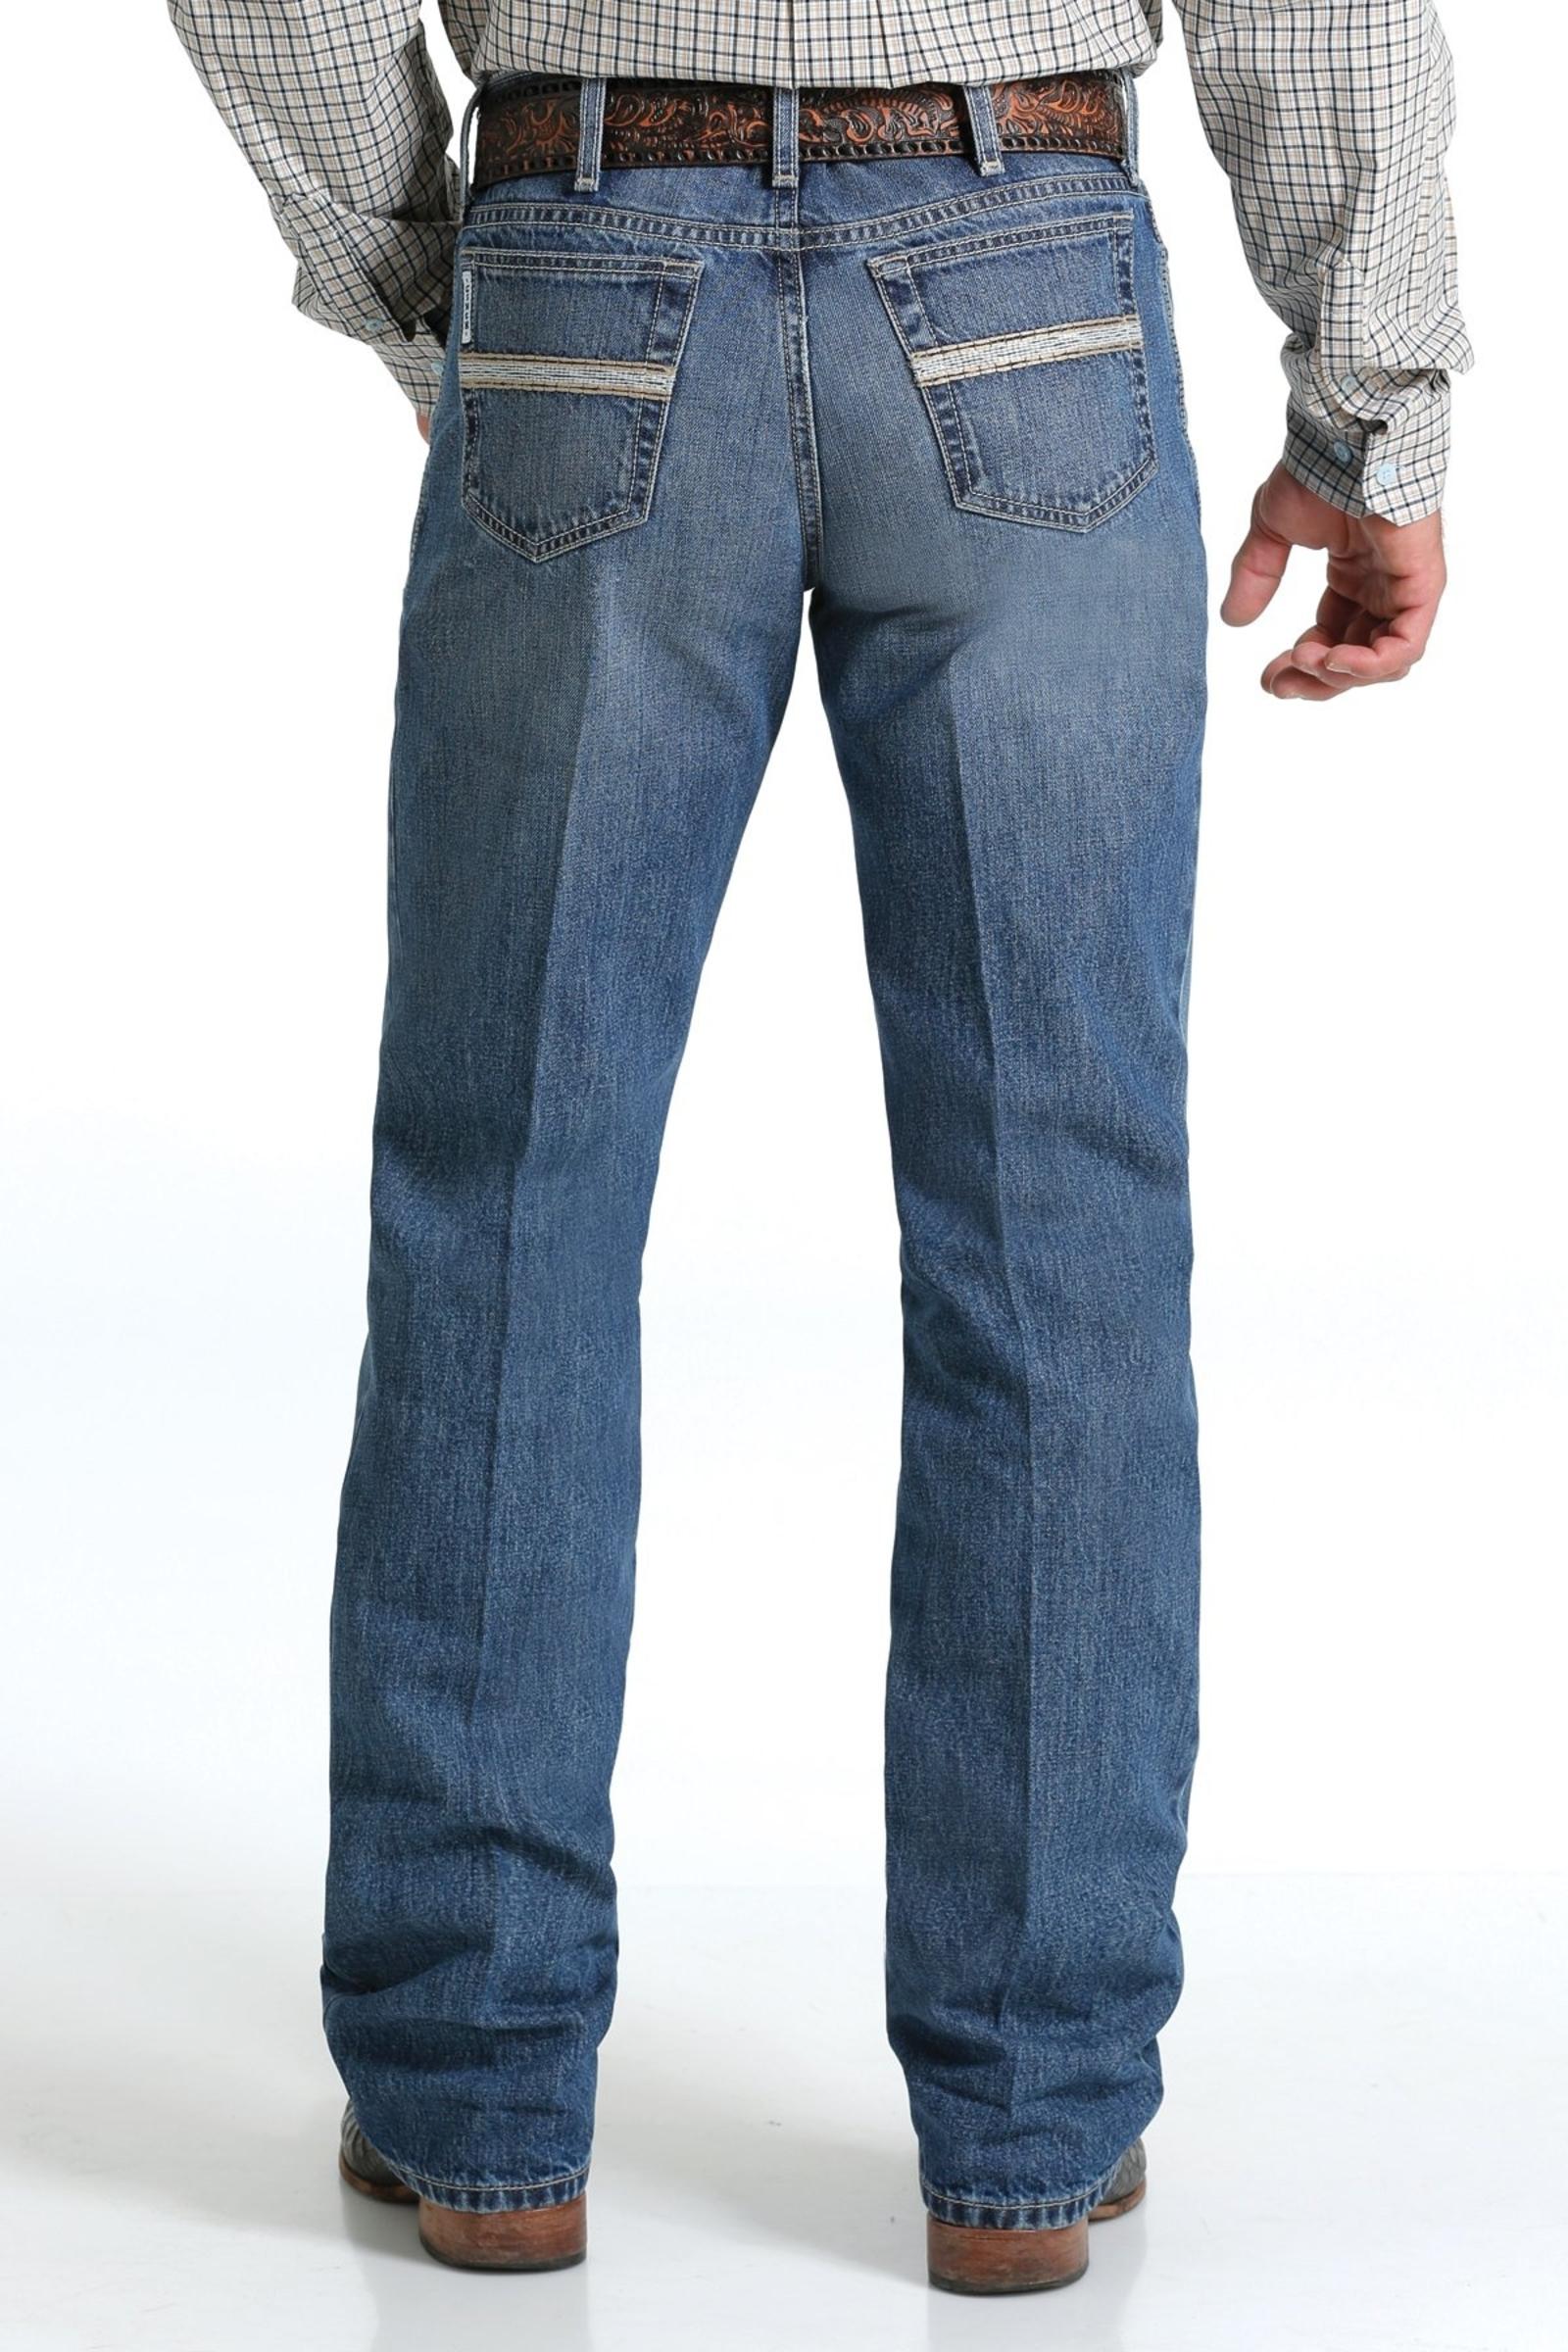 Cinch Jeans Men's Relaxed Fit White Label - Medium Stonewash